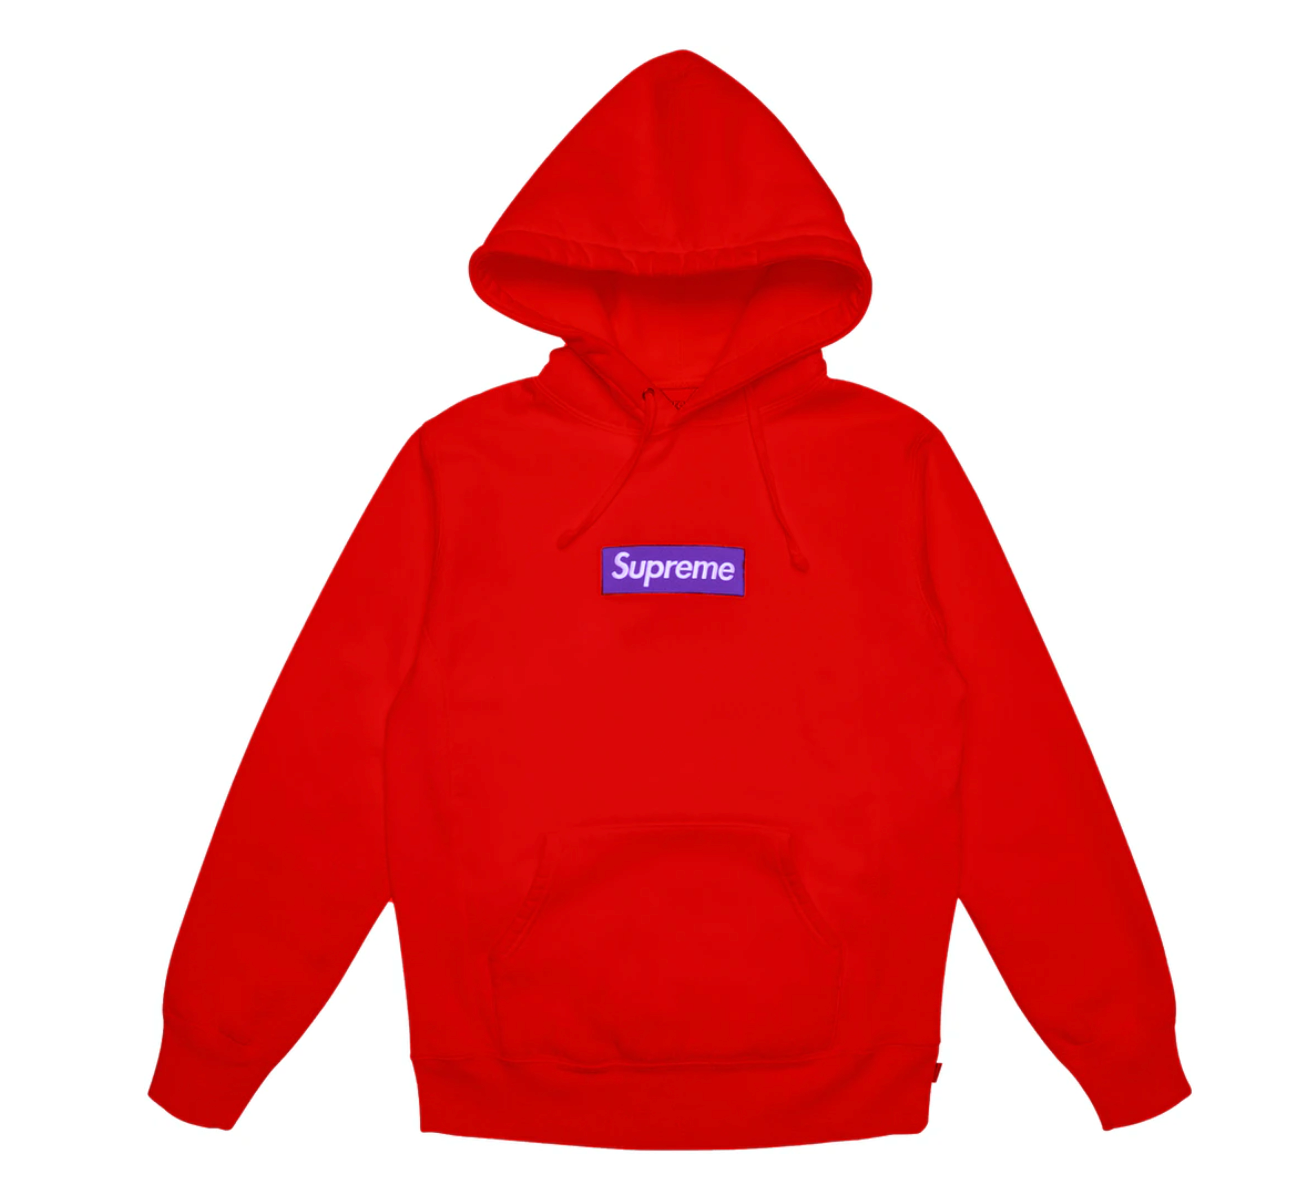 Supreme World Famous Hoodie -Medium -Good condition -$160 shipped